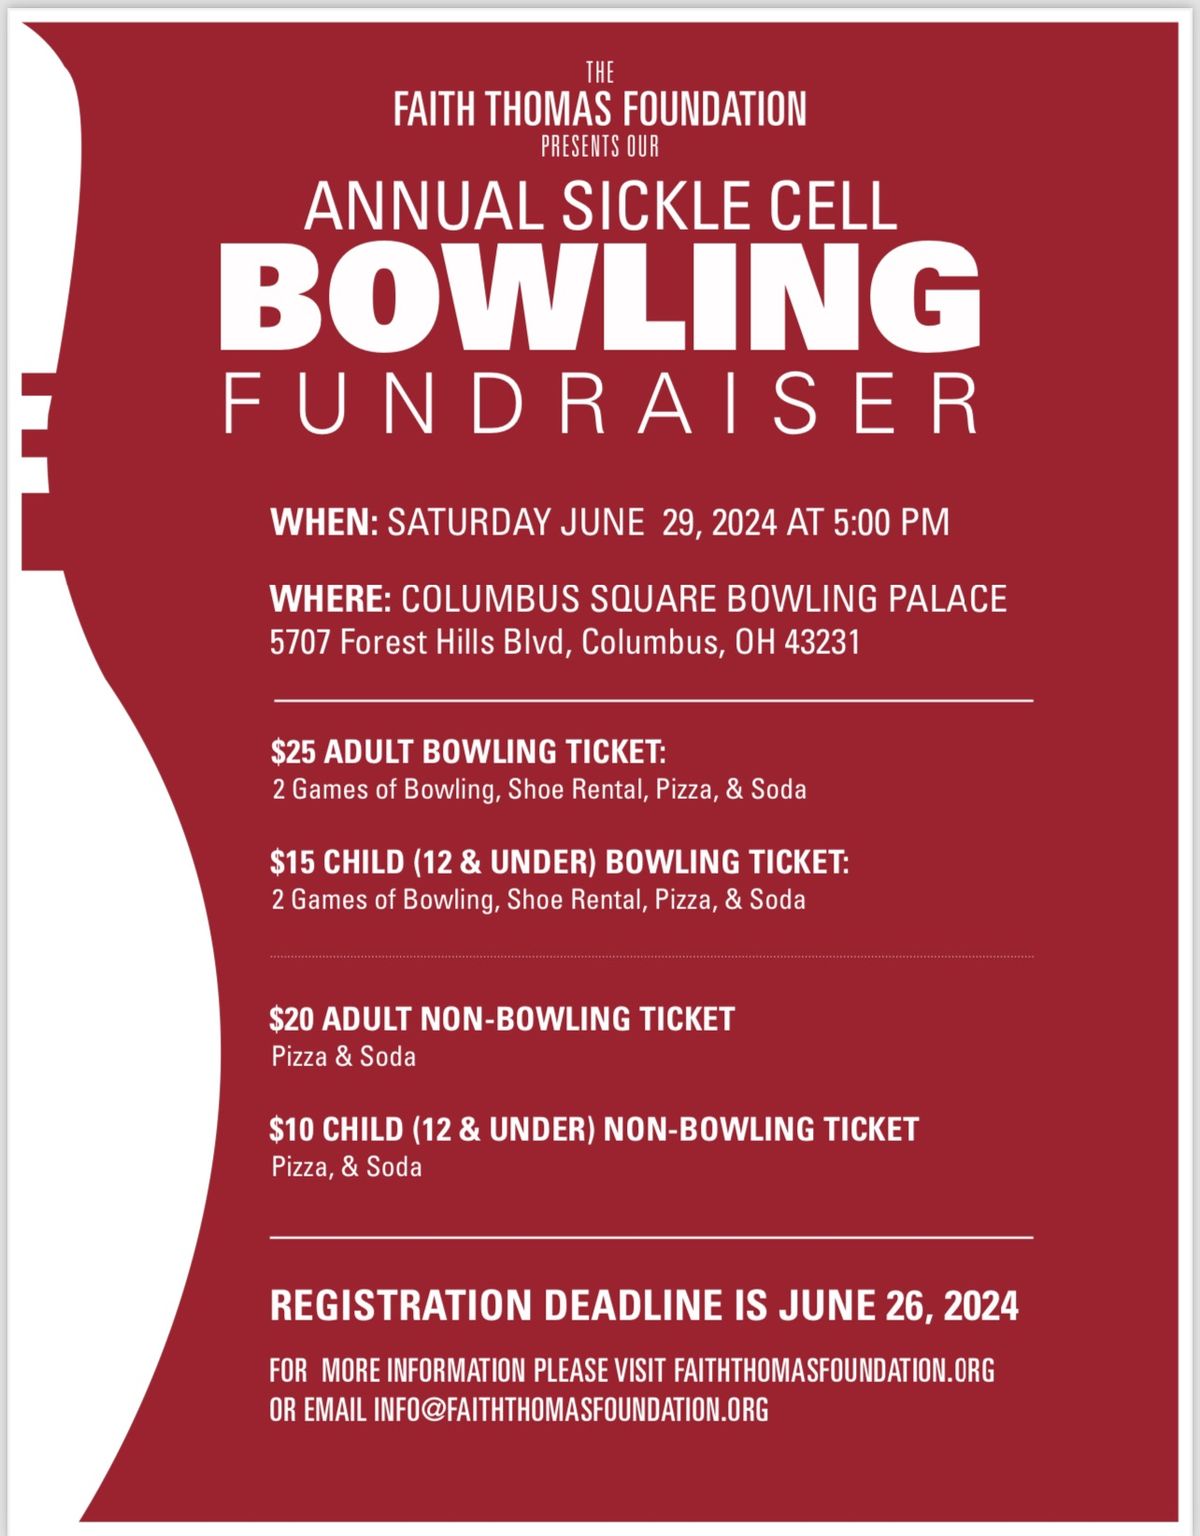 Annual Sickle Cell Bowling Fundraiser 